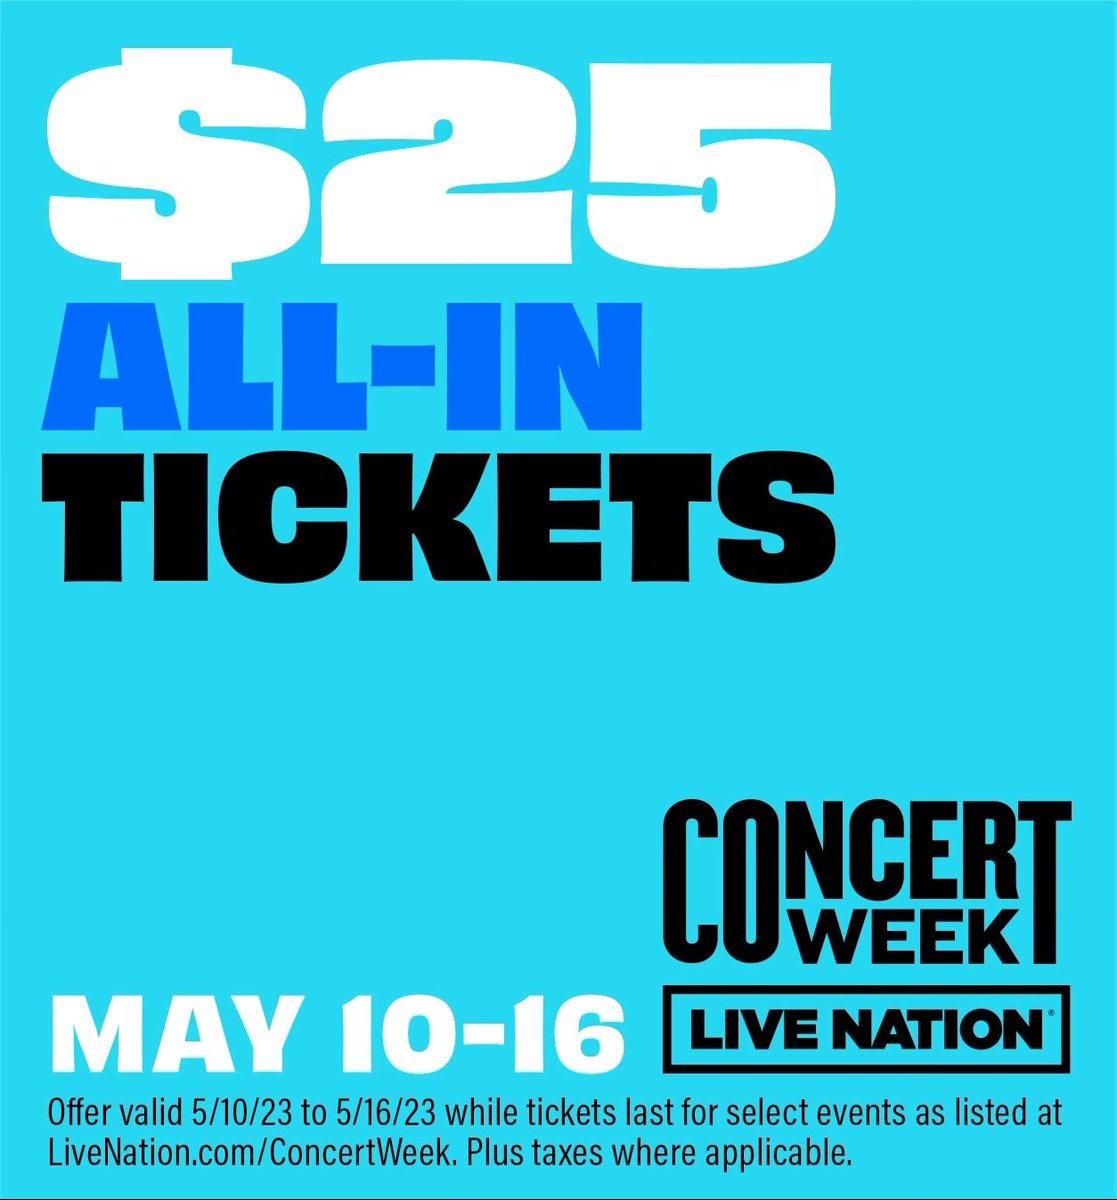 It’s #concertweek thanks to LIVE NATION. Come see us at the ⁦@Greek_Theatre⁩ ($25 all-in tickets baby)

ticketmaster.com/aly-aj-with-lo…